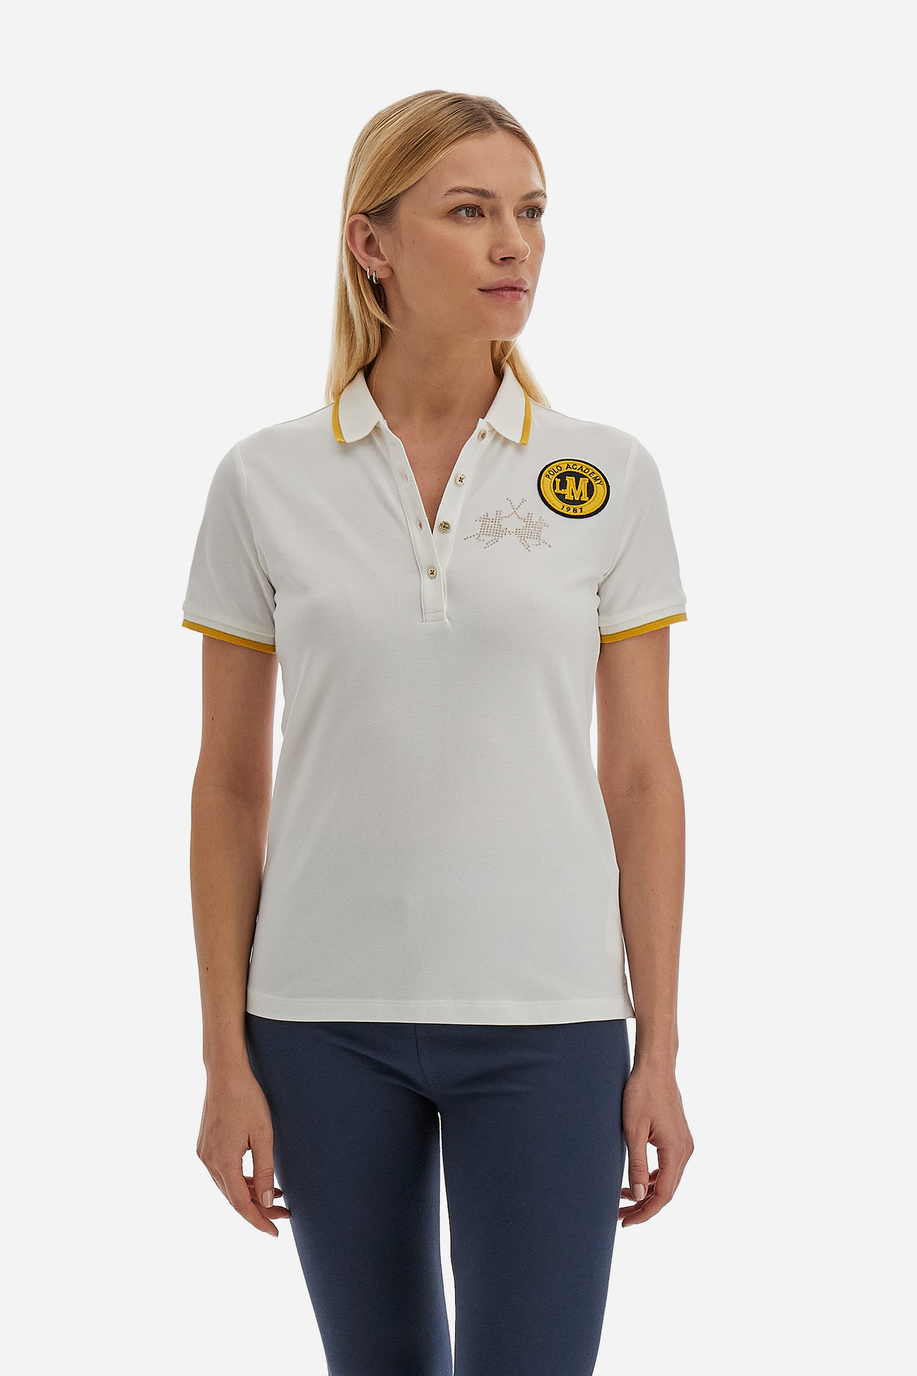 Short-sleeved women's polo shirt with sequined logo and Polo Academy patch - Varka - Polo Shirts | La Martina - Official Online Shop